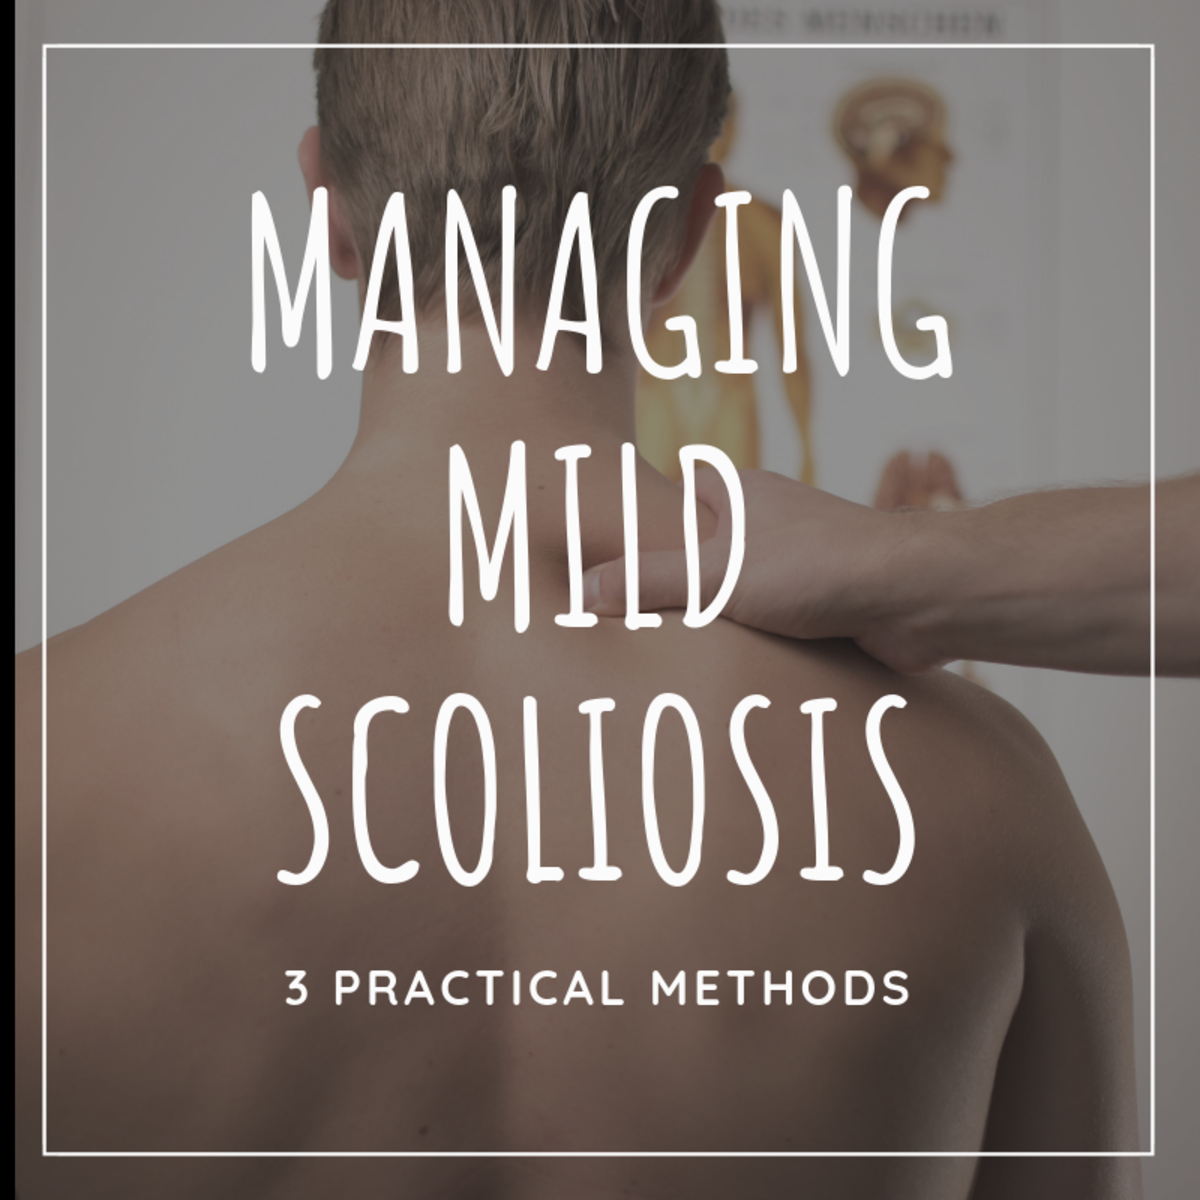 How to Manage Mild Scoliosis: 3 Simple and Effective Methods